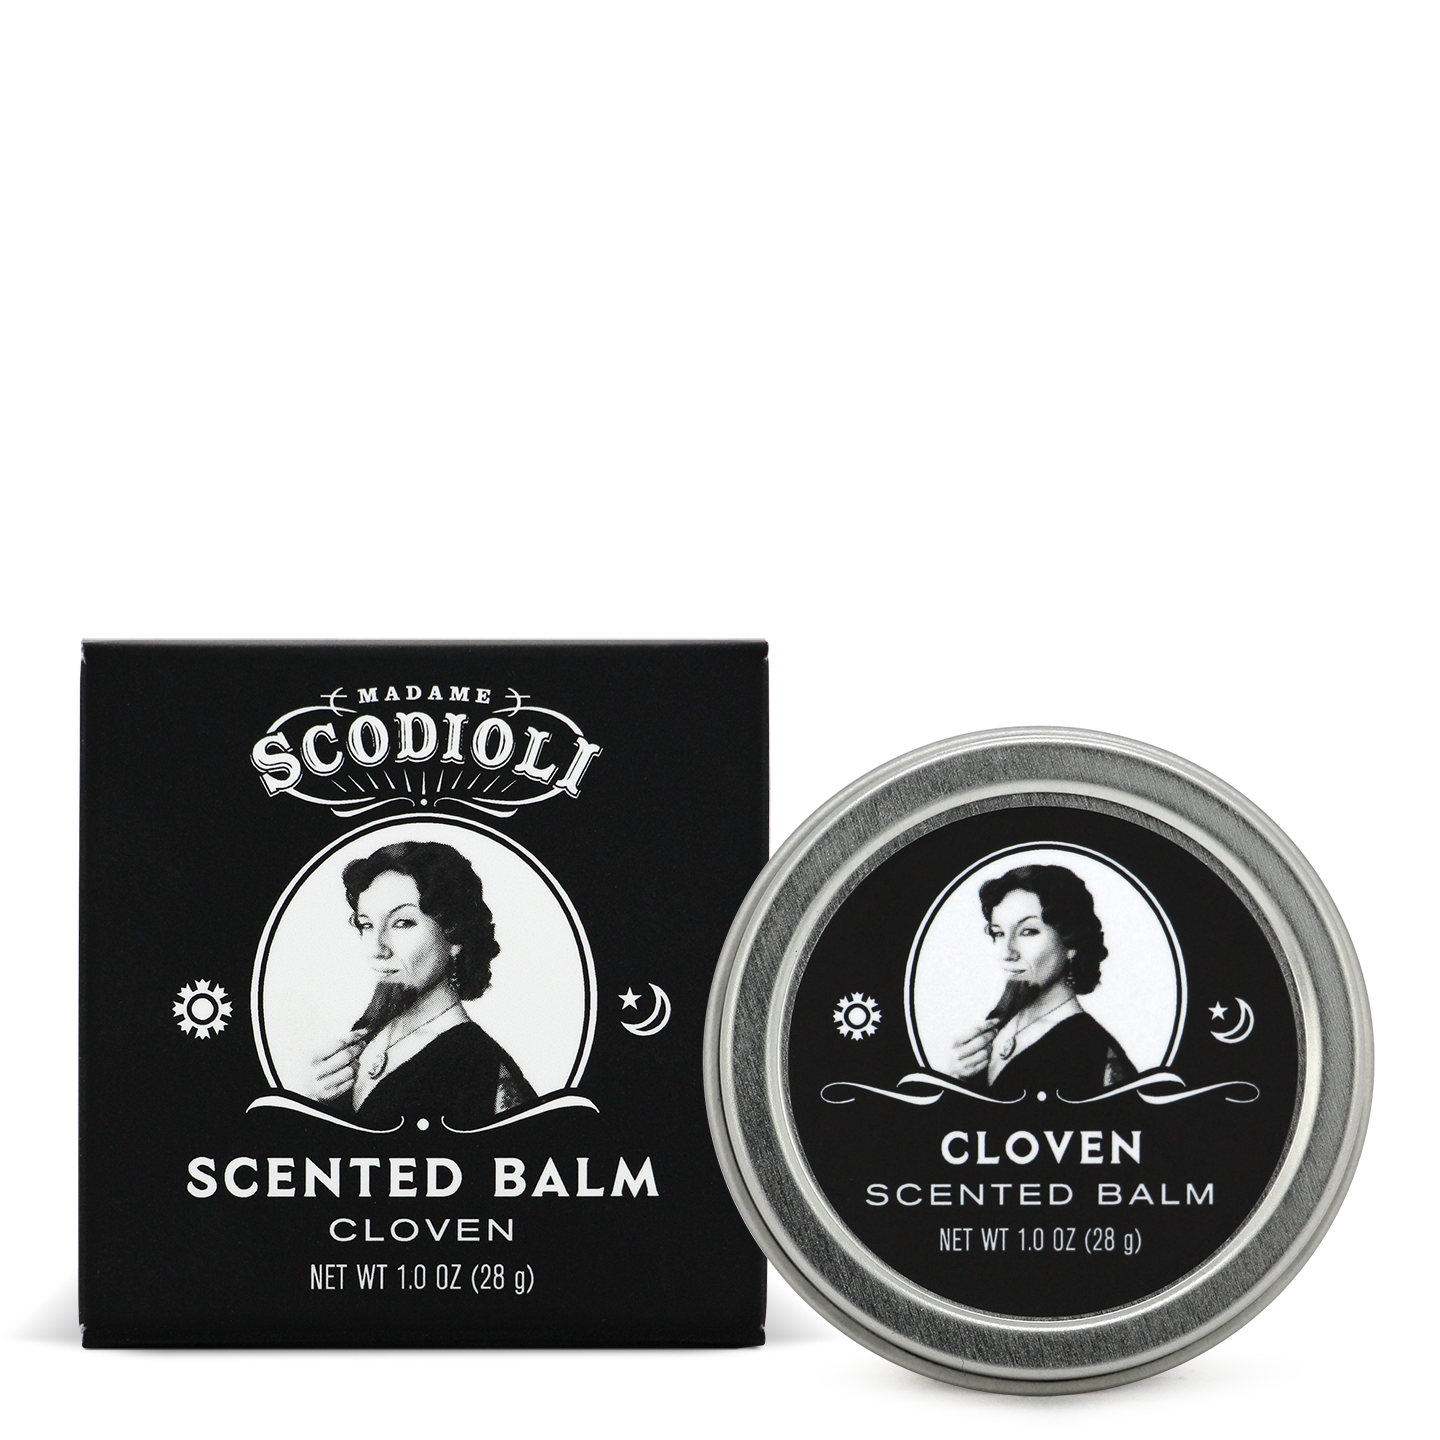 Cloven Scented Balm